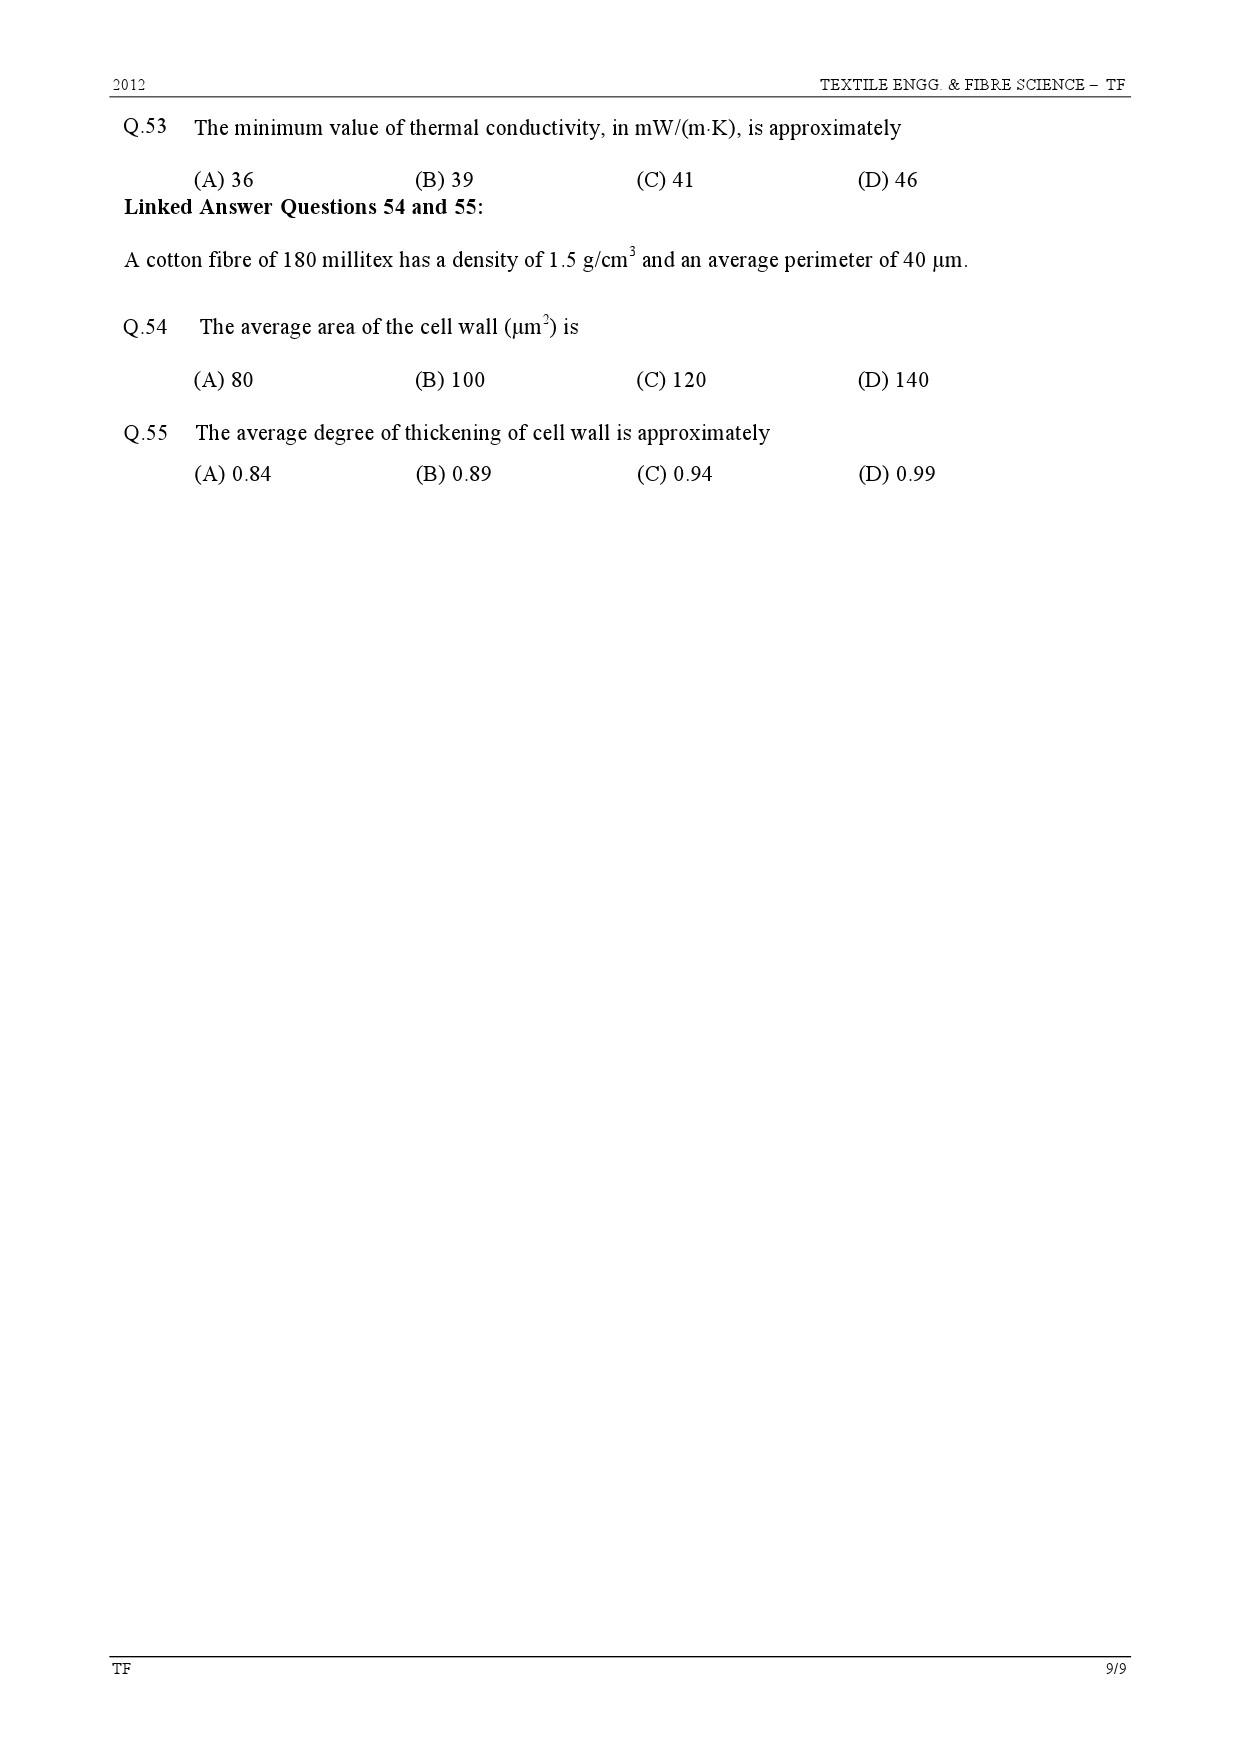 GATE Exam Question Paper 2012 Textile Engineering and Fibre Science 9